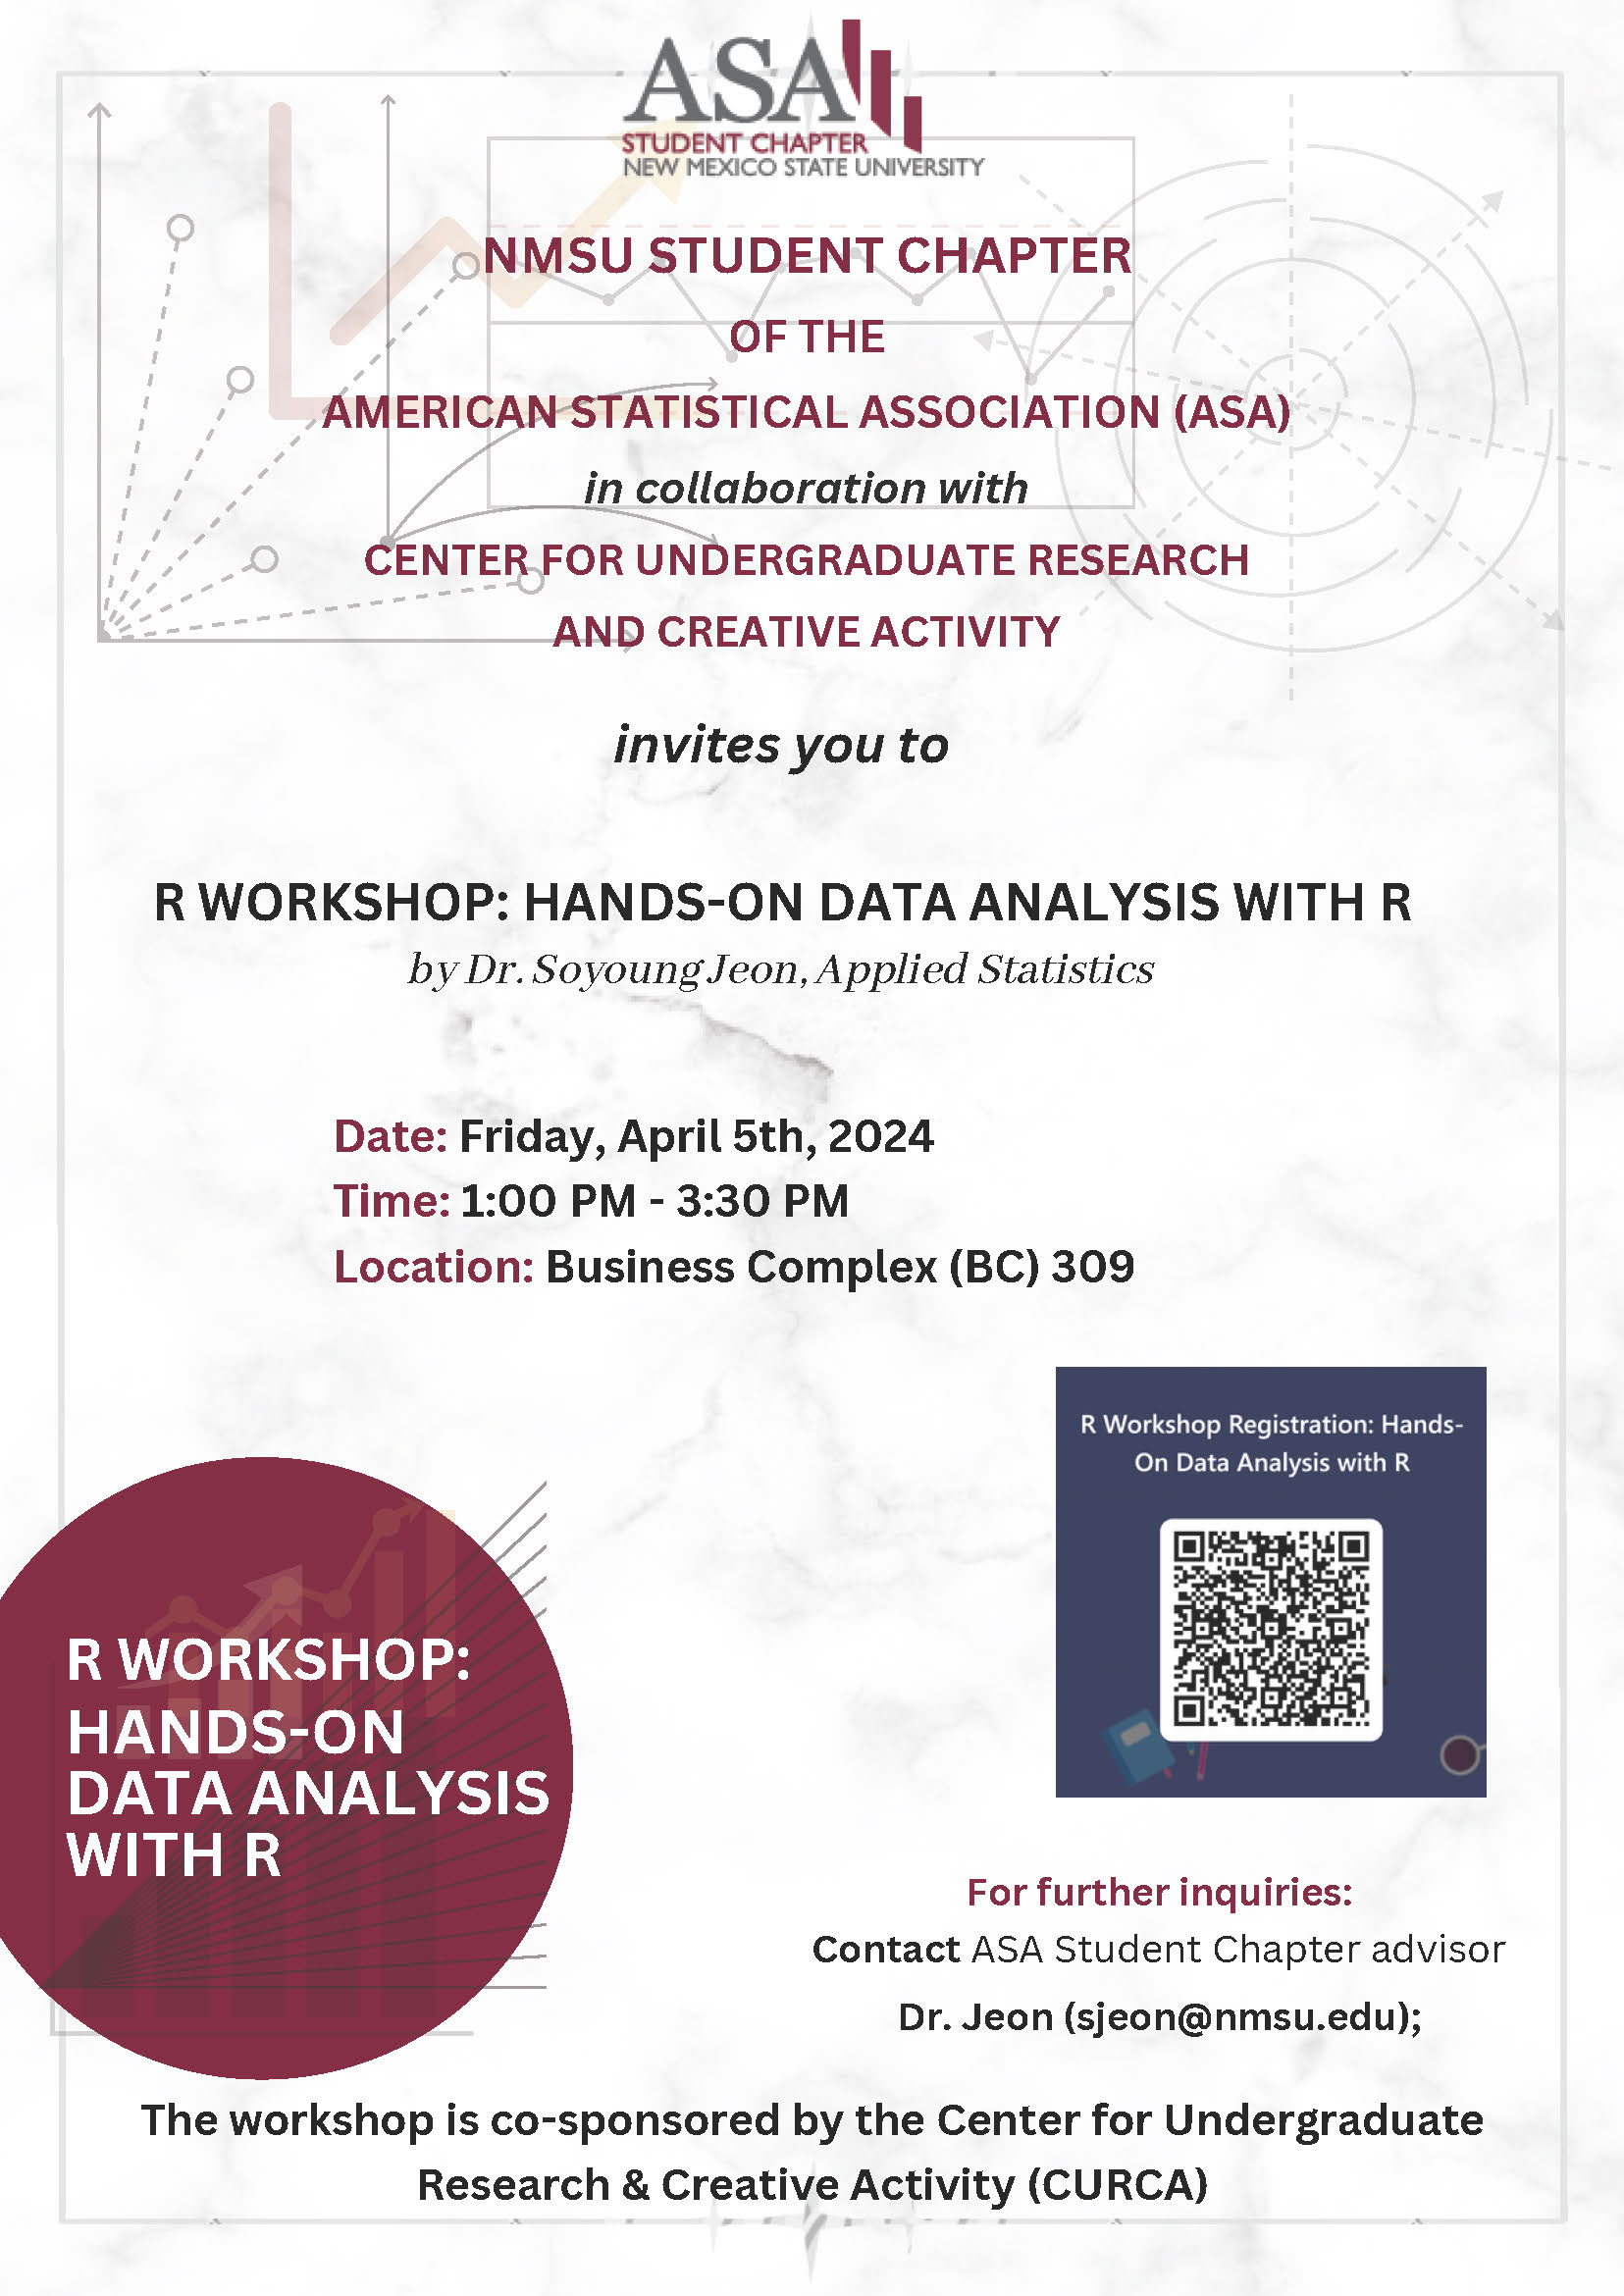 Please join Dr. Jeon for a workshop on using R Software for data analysis, Friday, April 5, 1-3:30 in BC 309.